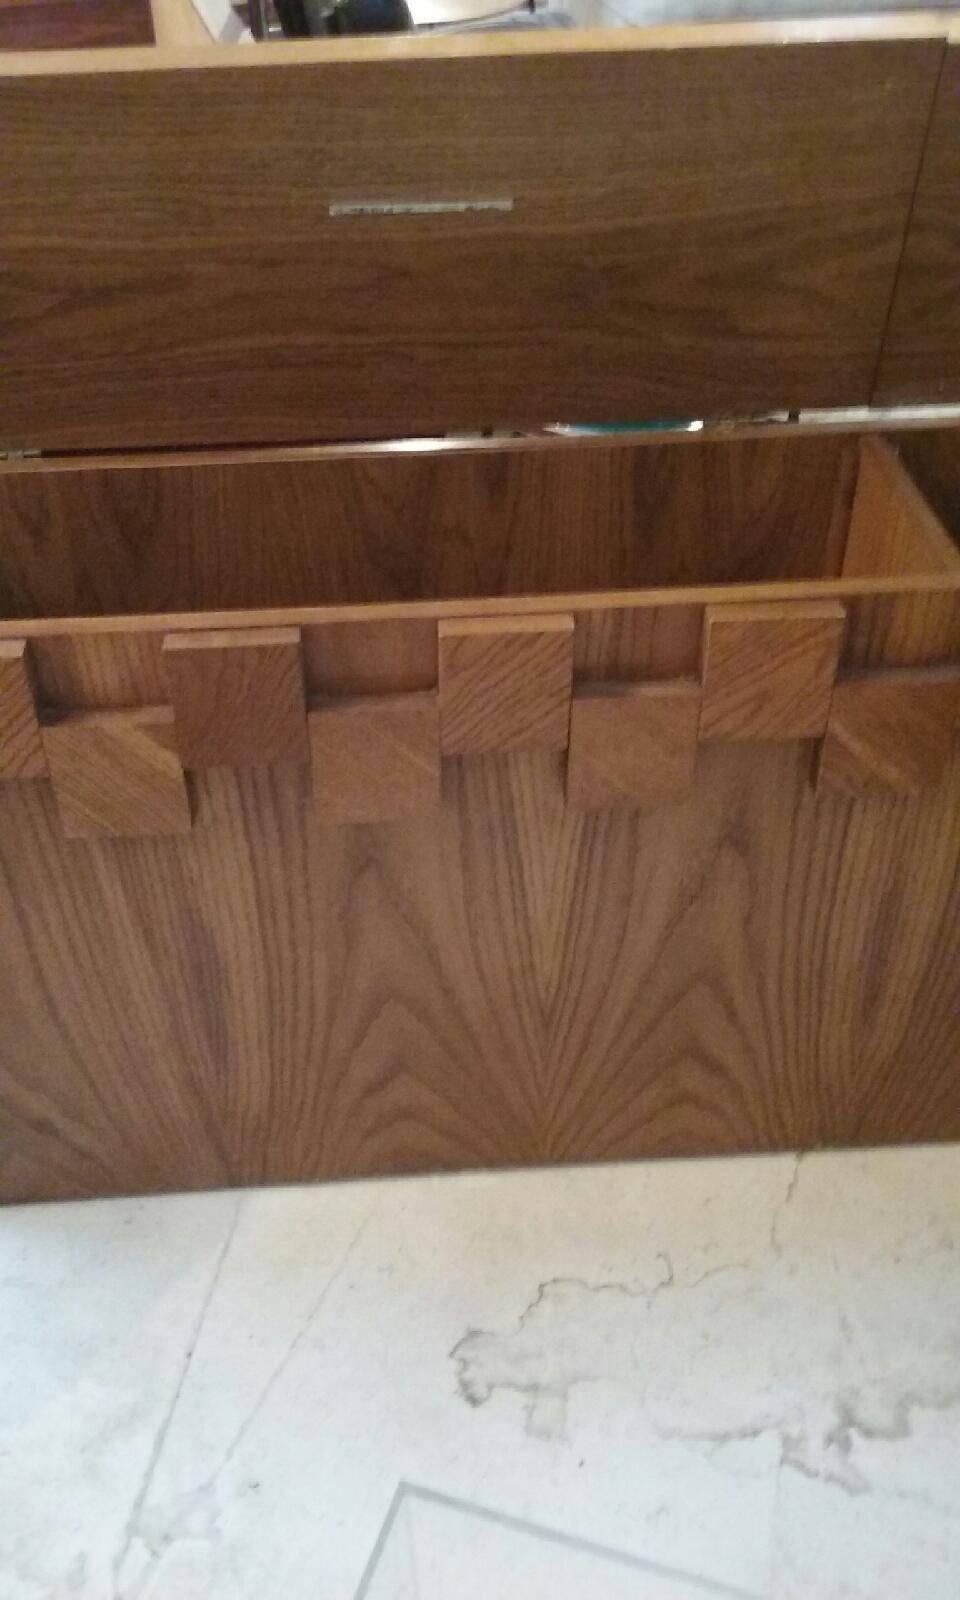 Charming Mid-Century Modern Lane Brutalist Oak Headboard In Excellent Condition For Sale In Los Angeles, CA